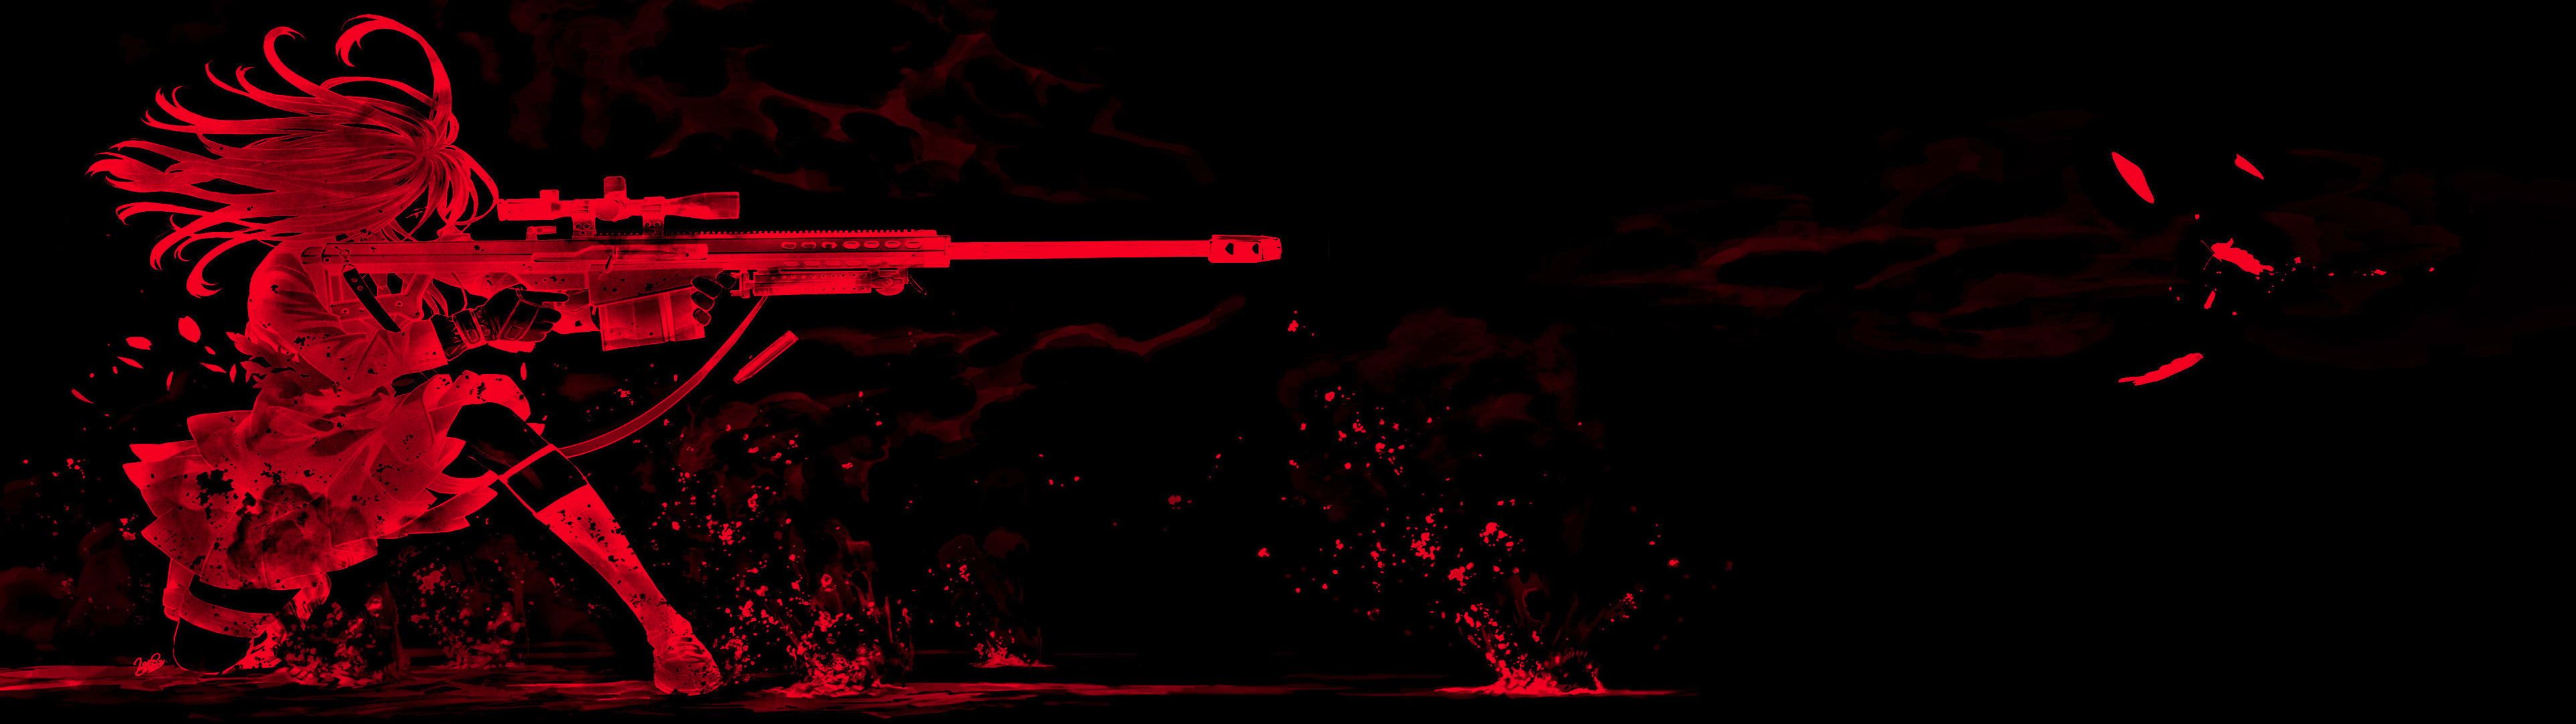 Black And Red Anime Wallpaper K